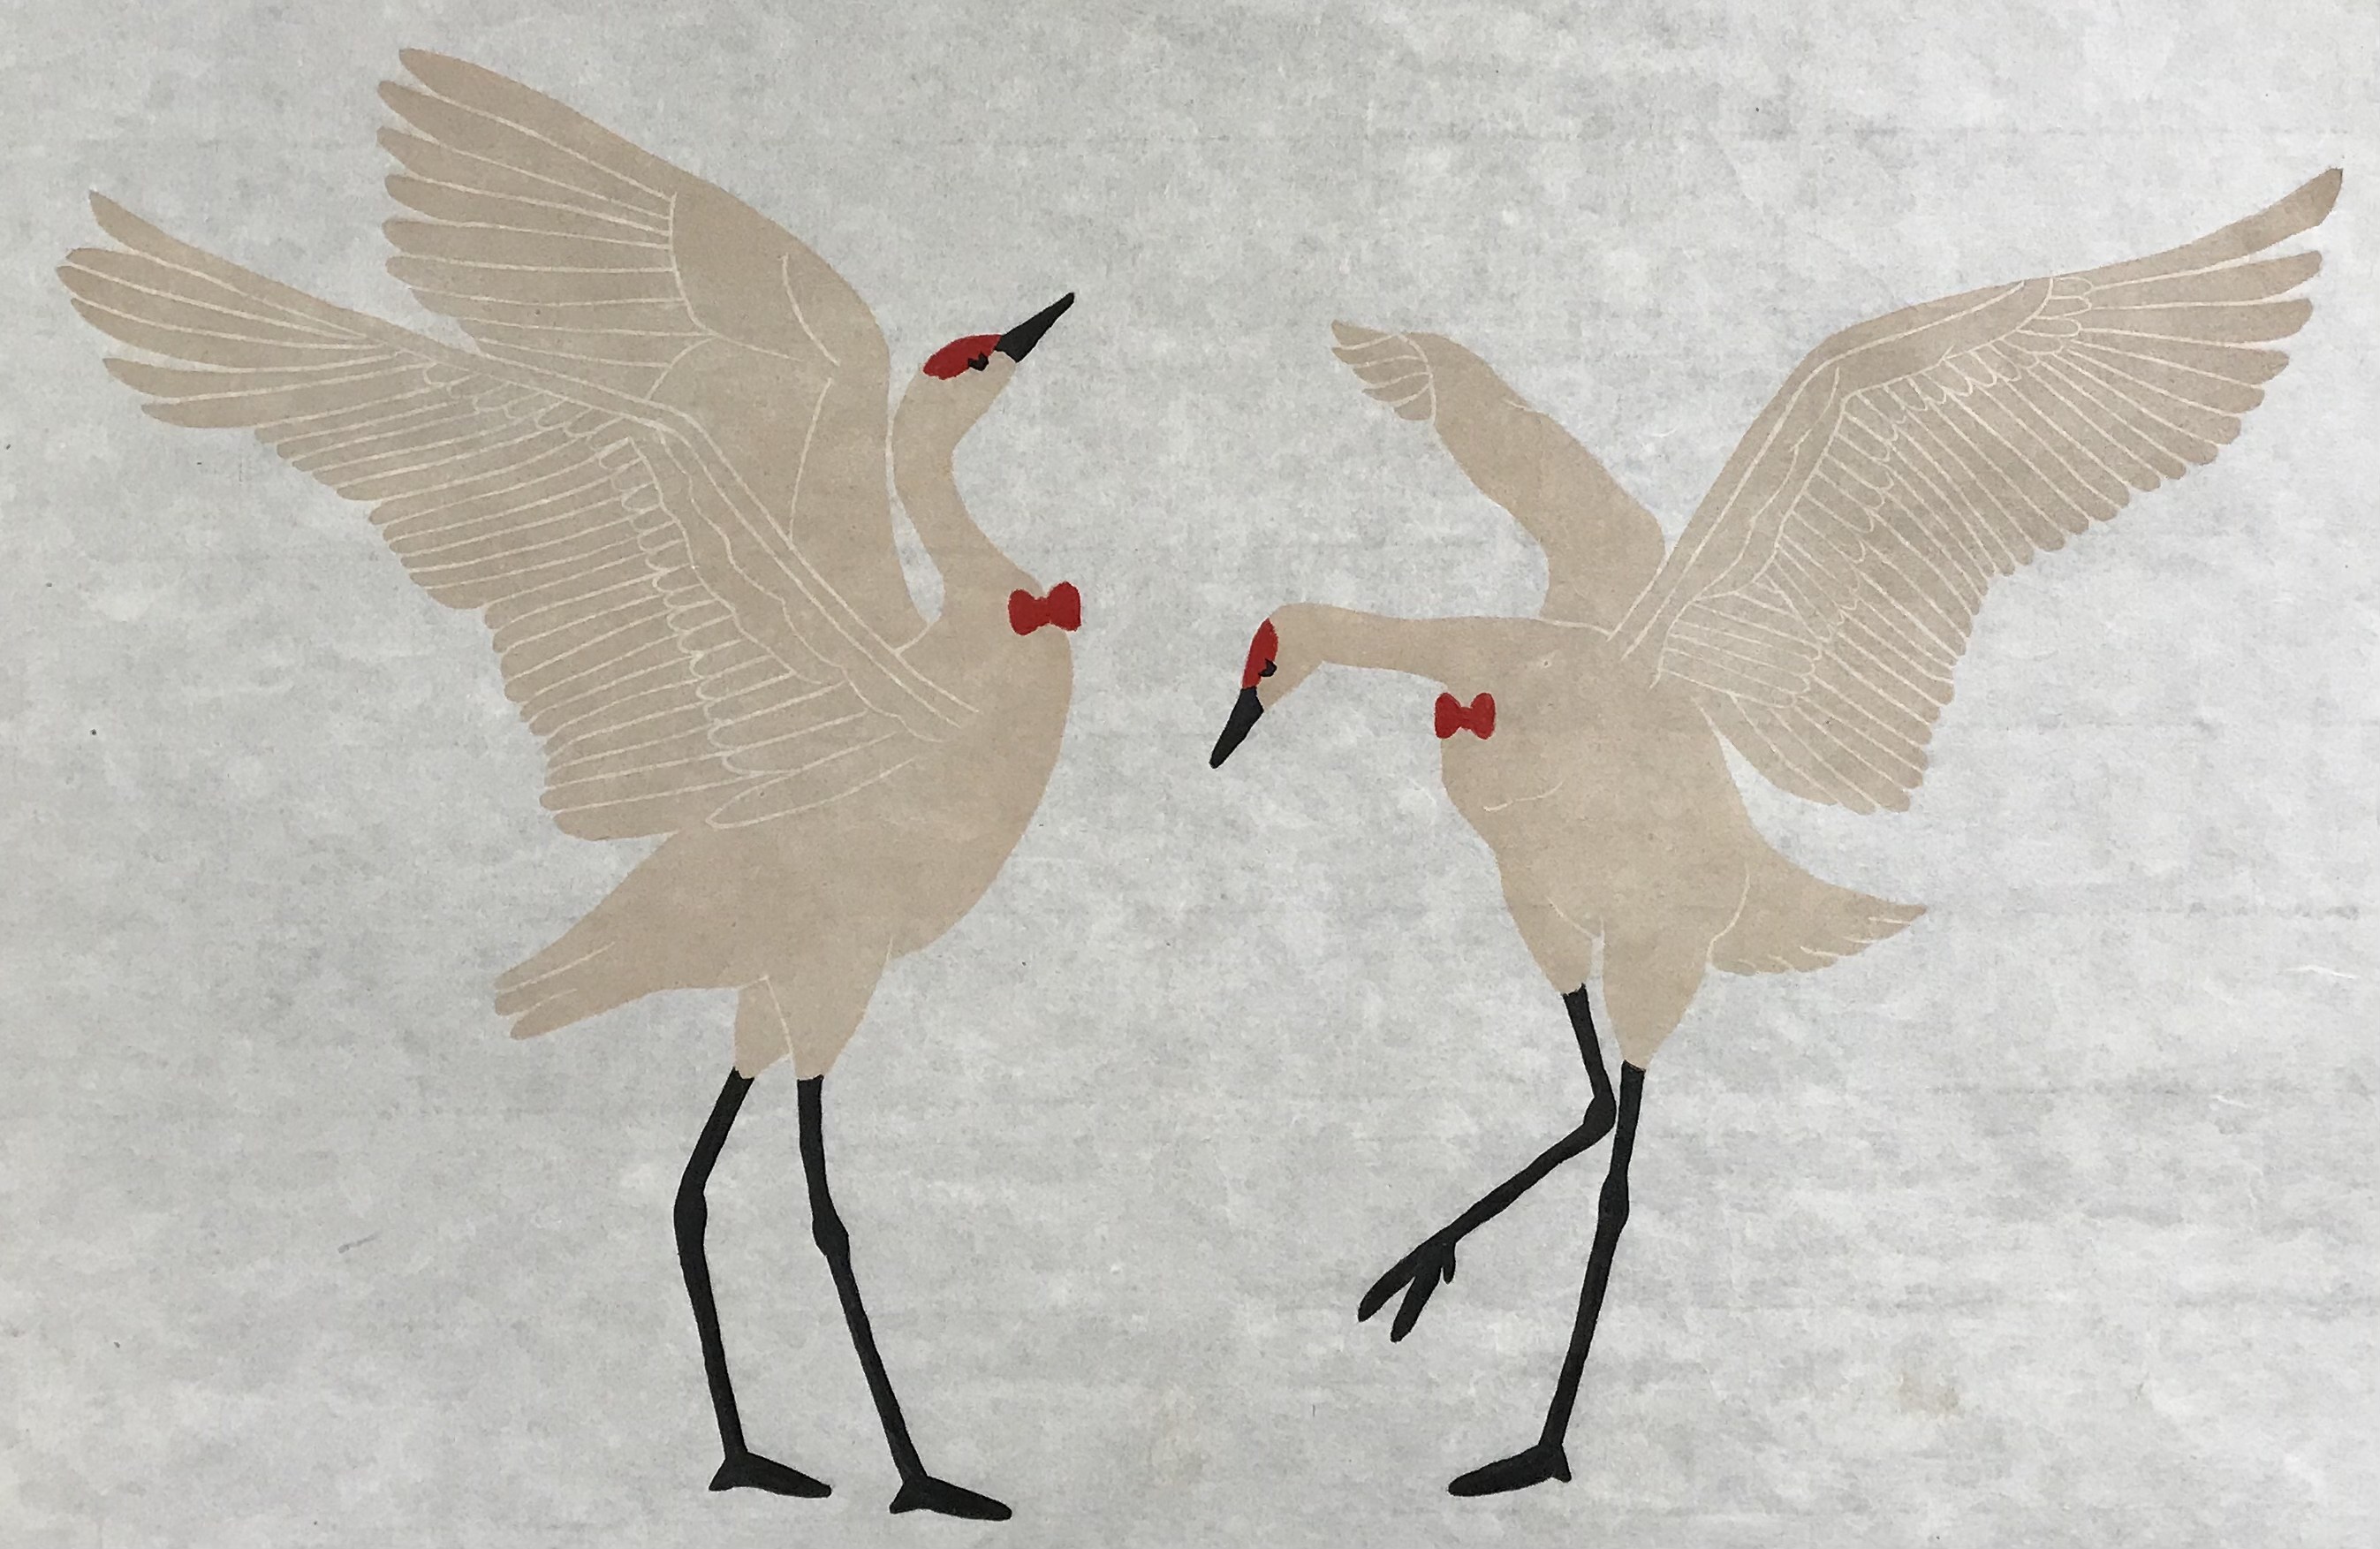 Two cranes facing each other, image courtesy of the artist